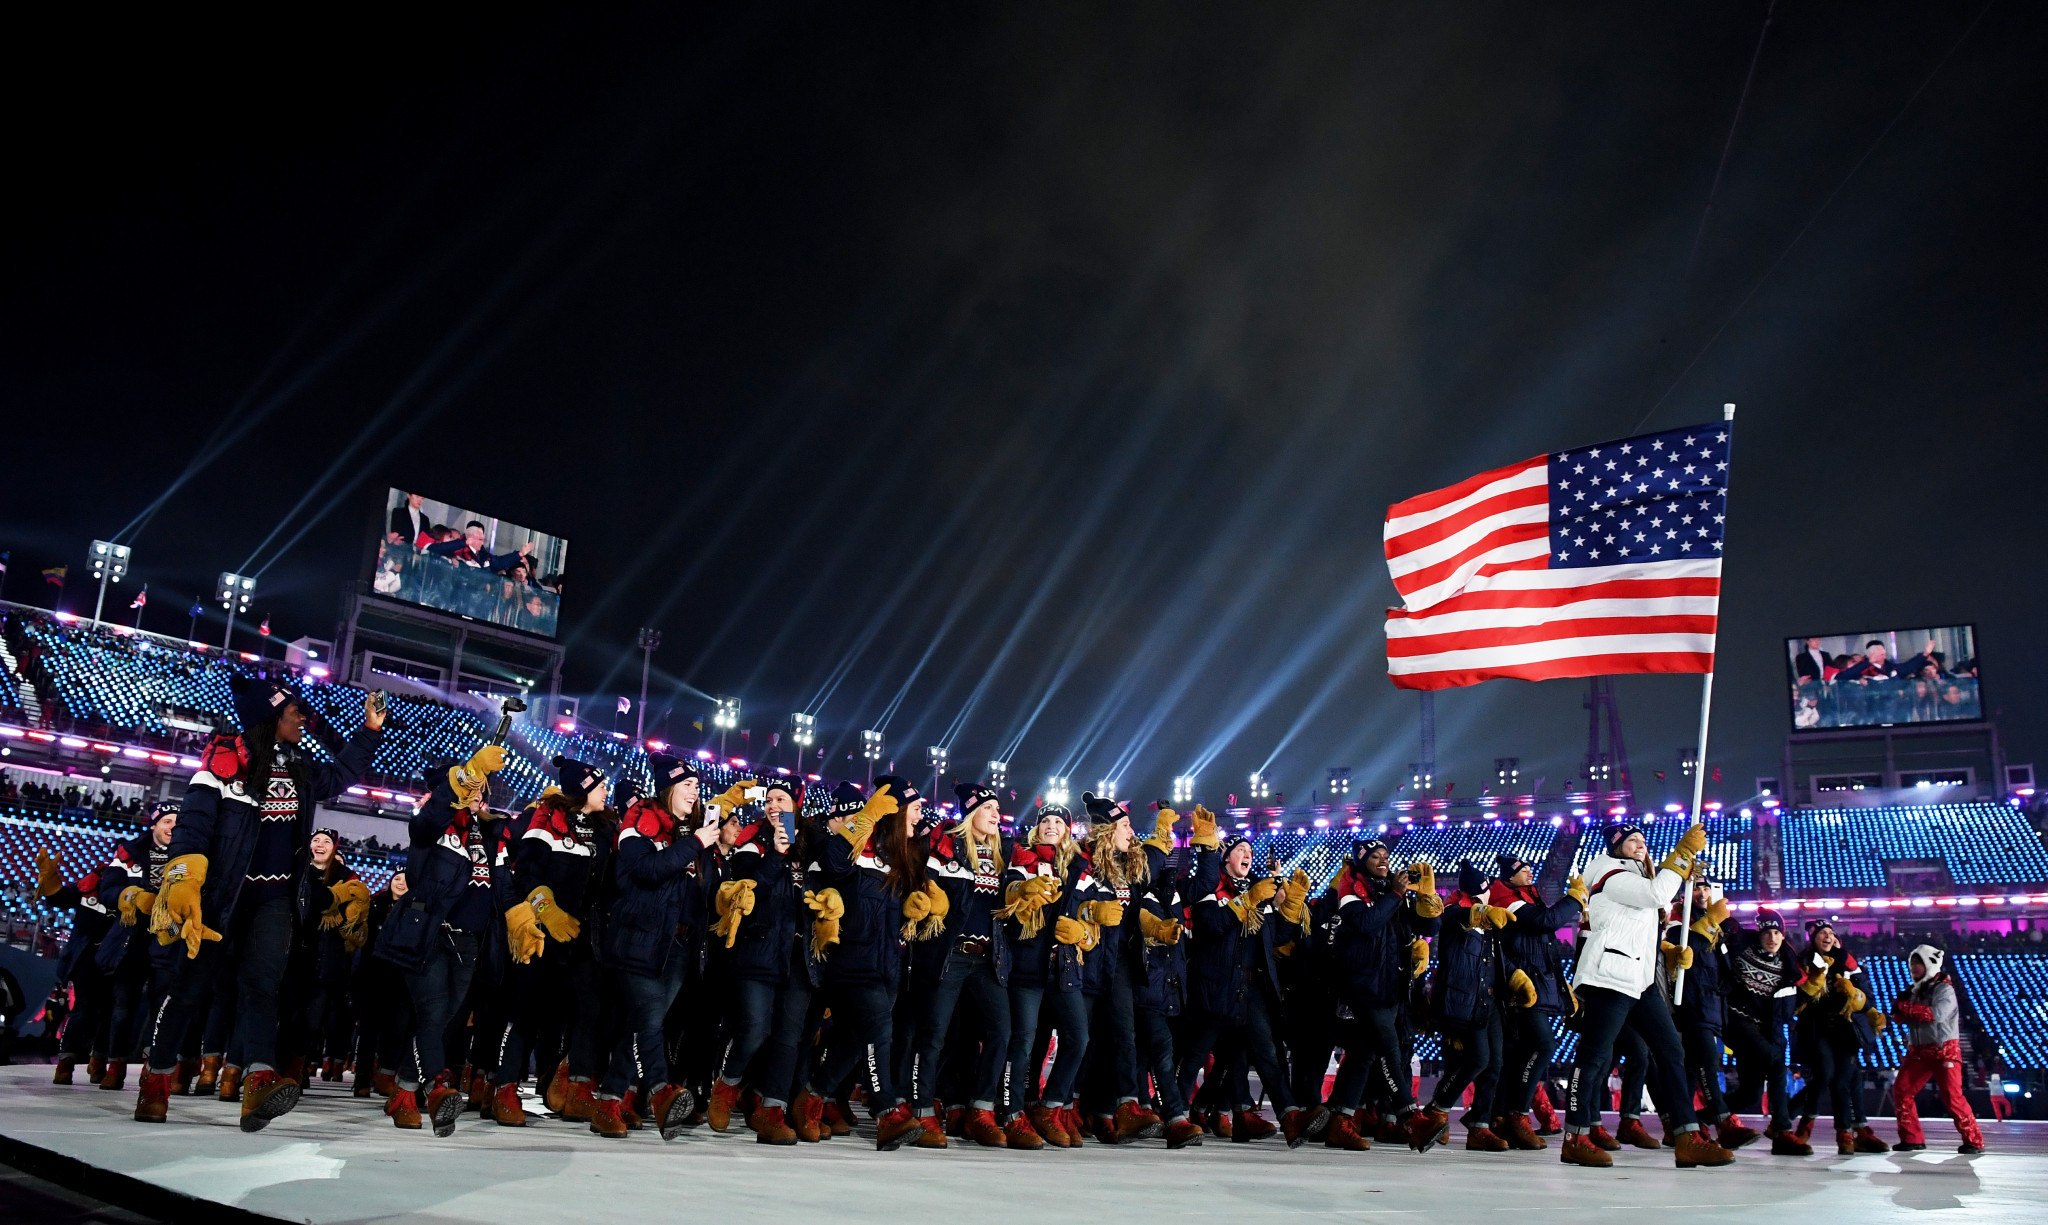 American athletes will not face punishment from the USOPC for podium protests aimed at promoting human rights and social justice at Tokyo 2020 and beyond ©Getty Images